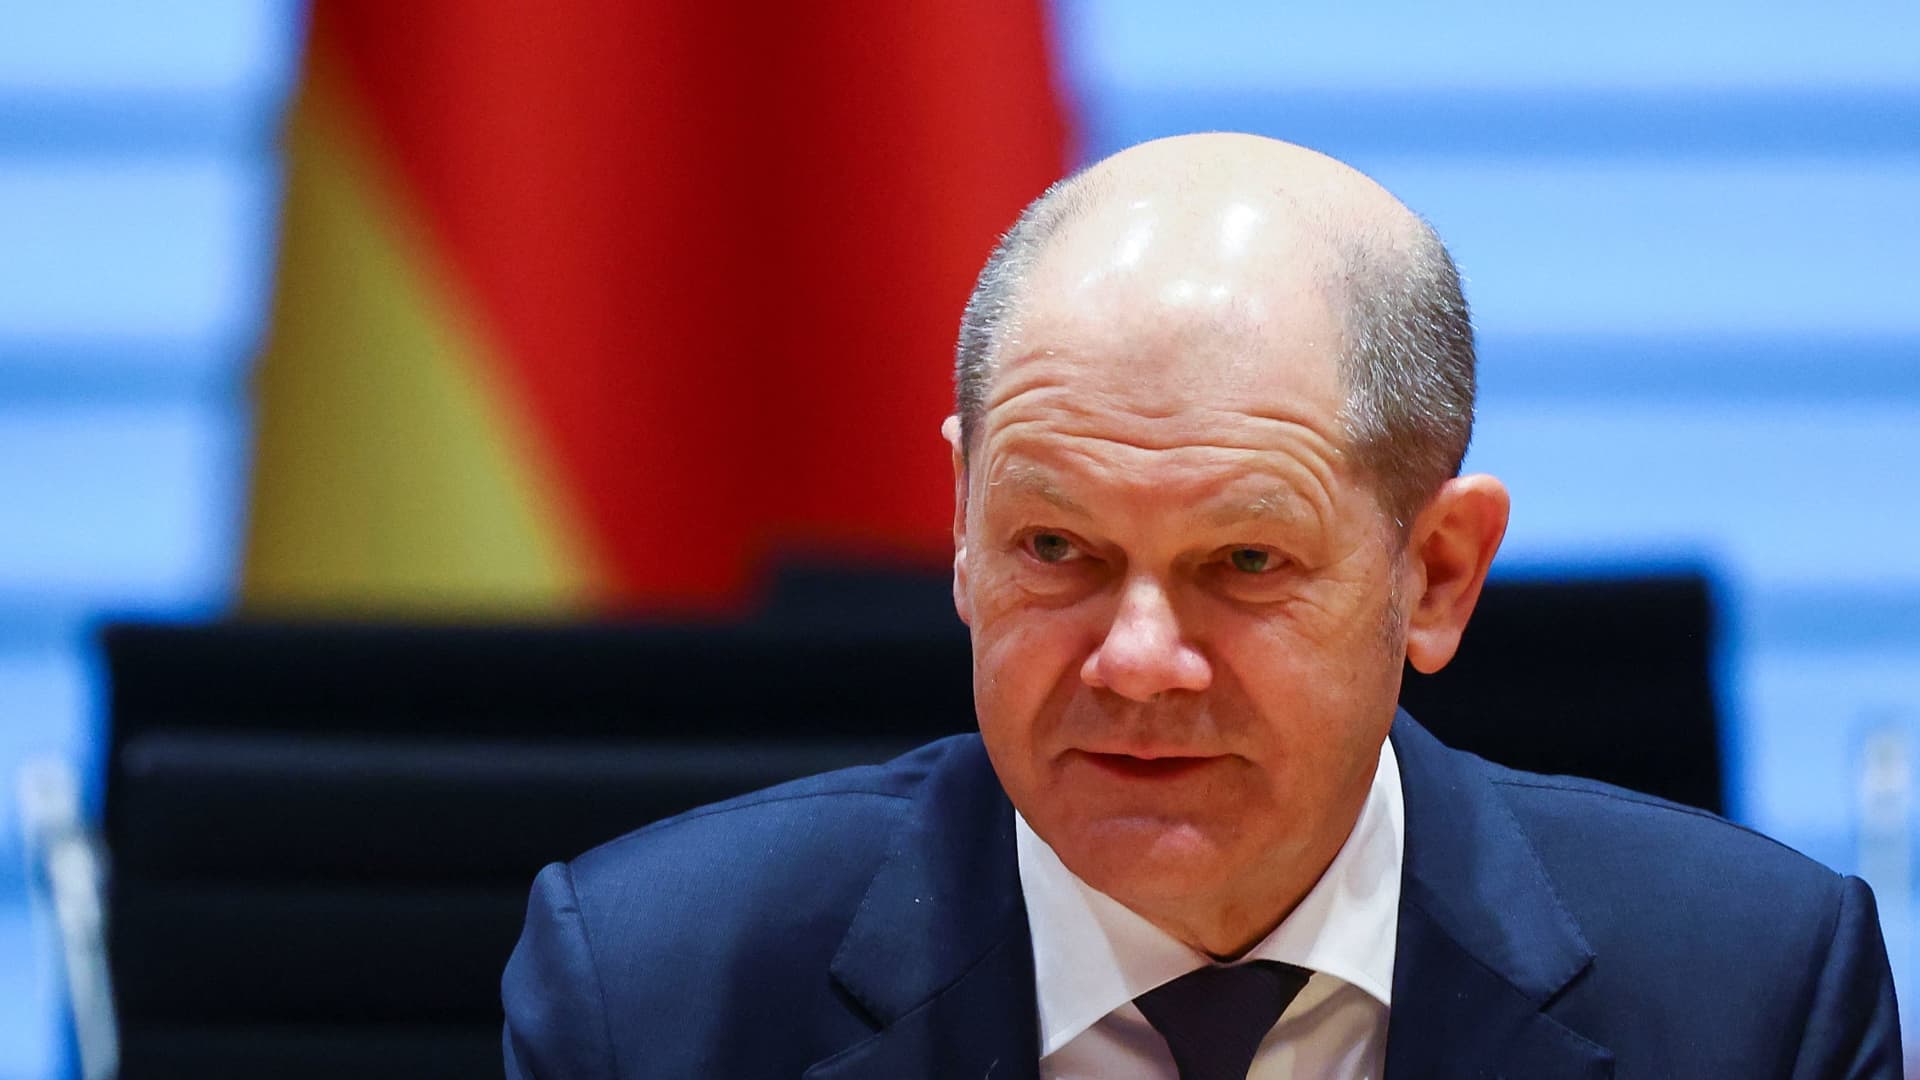 Ukraine security guarantees will not be same as for NATO member, Scholz says